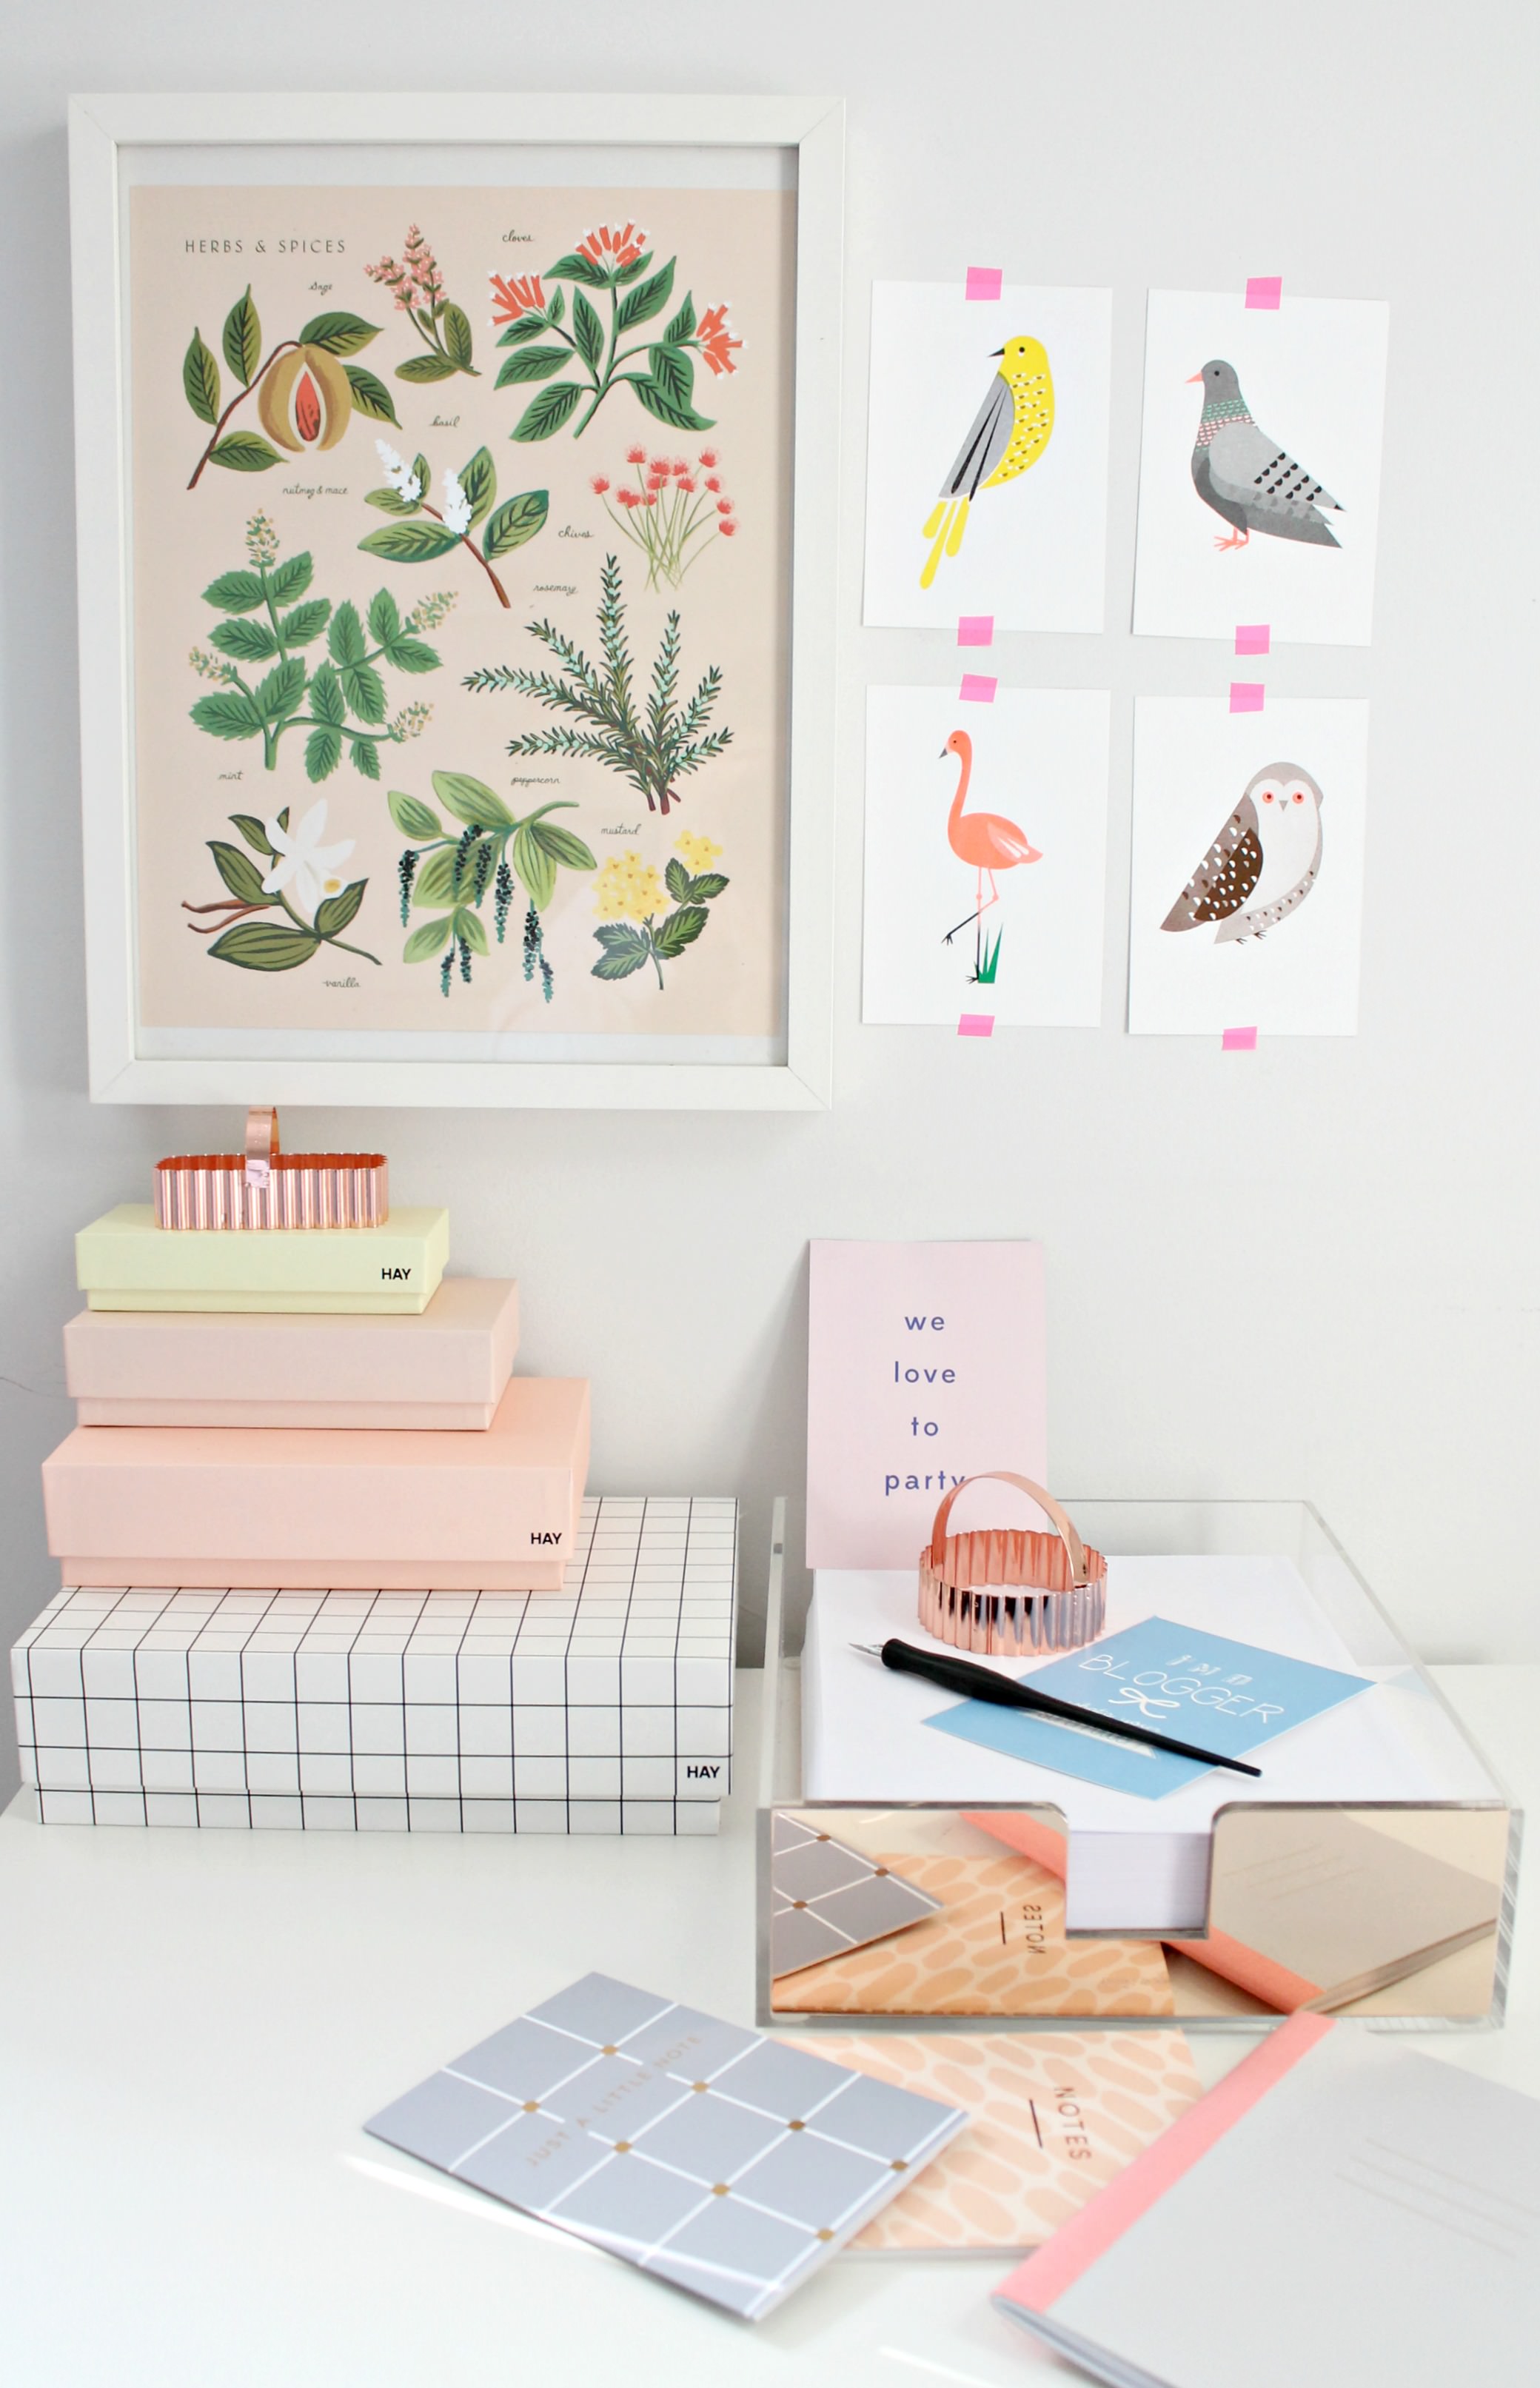 Little-Big-Bell-workspace-photo-and-styling-by-Geraldine-Tan